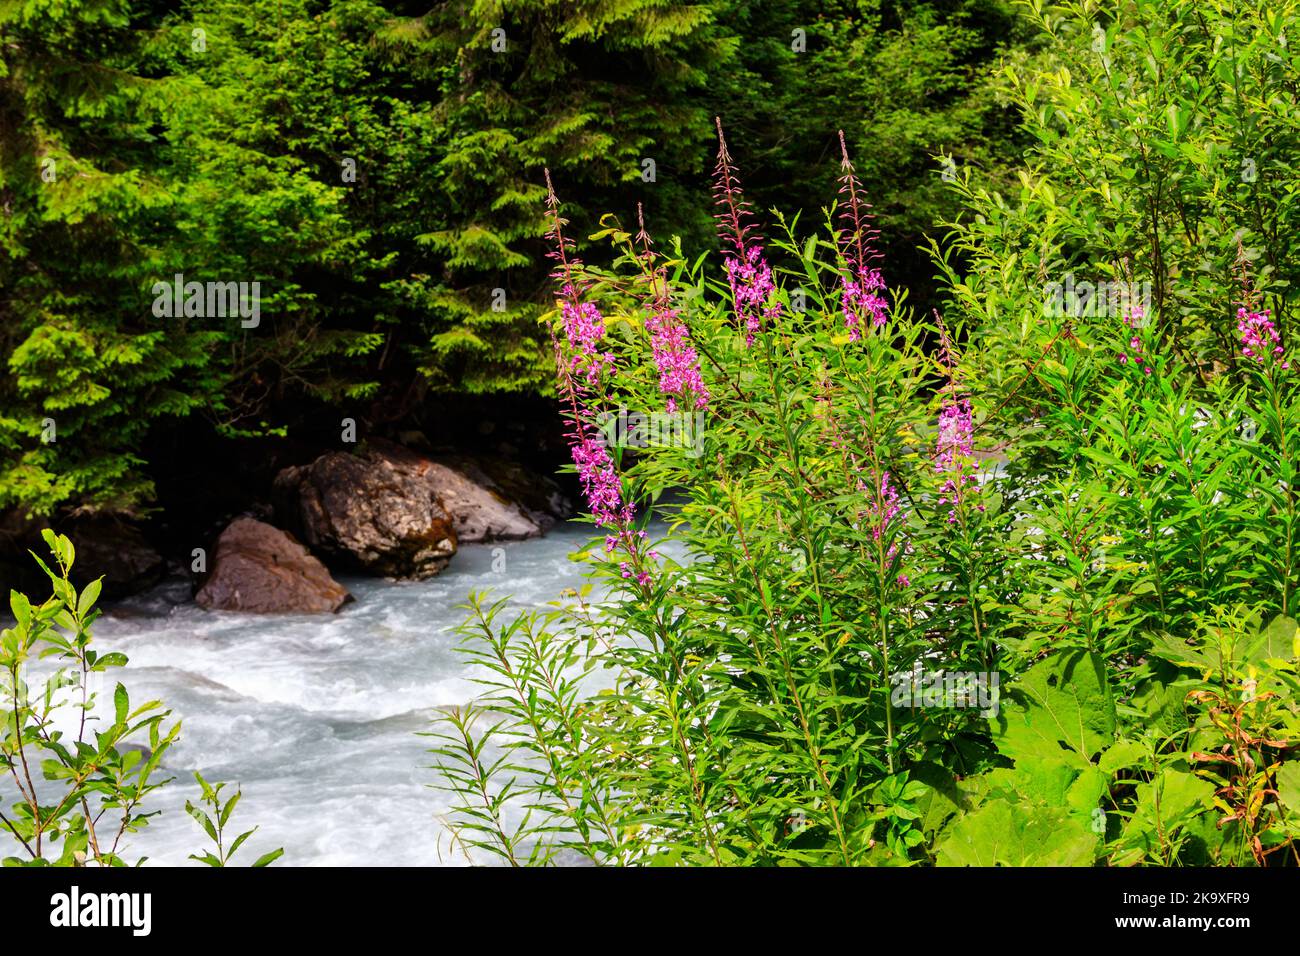 Rosebay willowherb or fireweed (Chamaenerion angustifolium) growing by the river Stock Photo